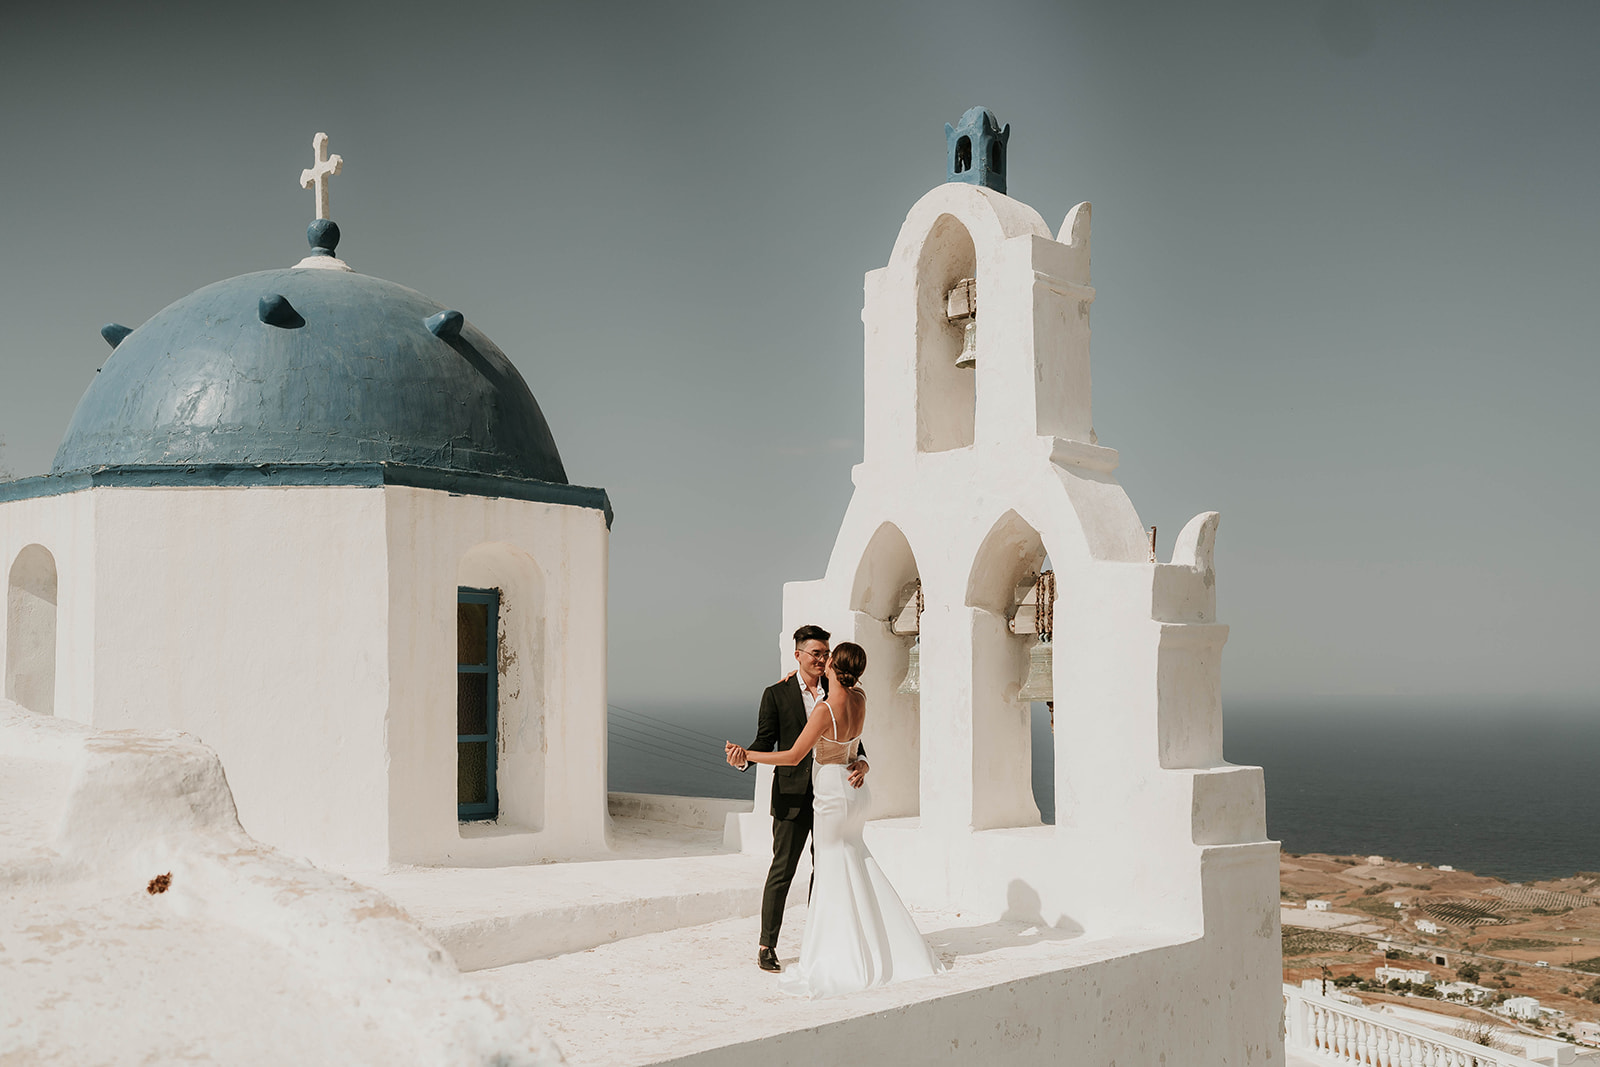  A couple who eloped in Santorini say their vows on roof of church